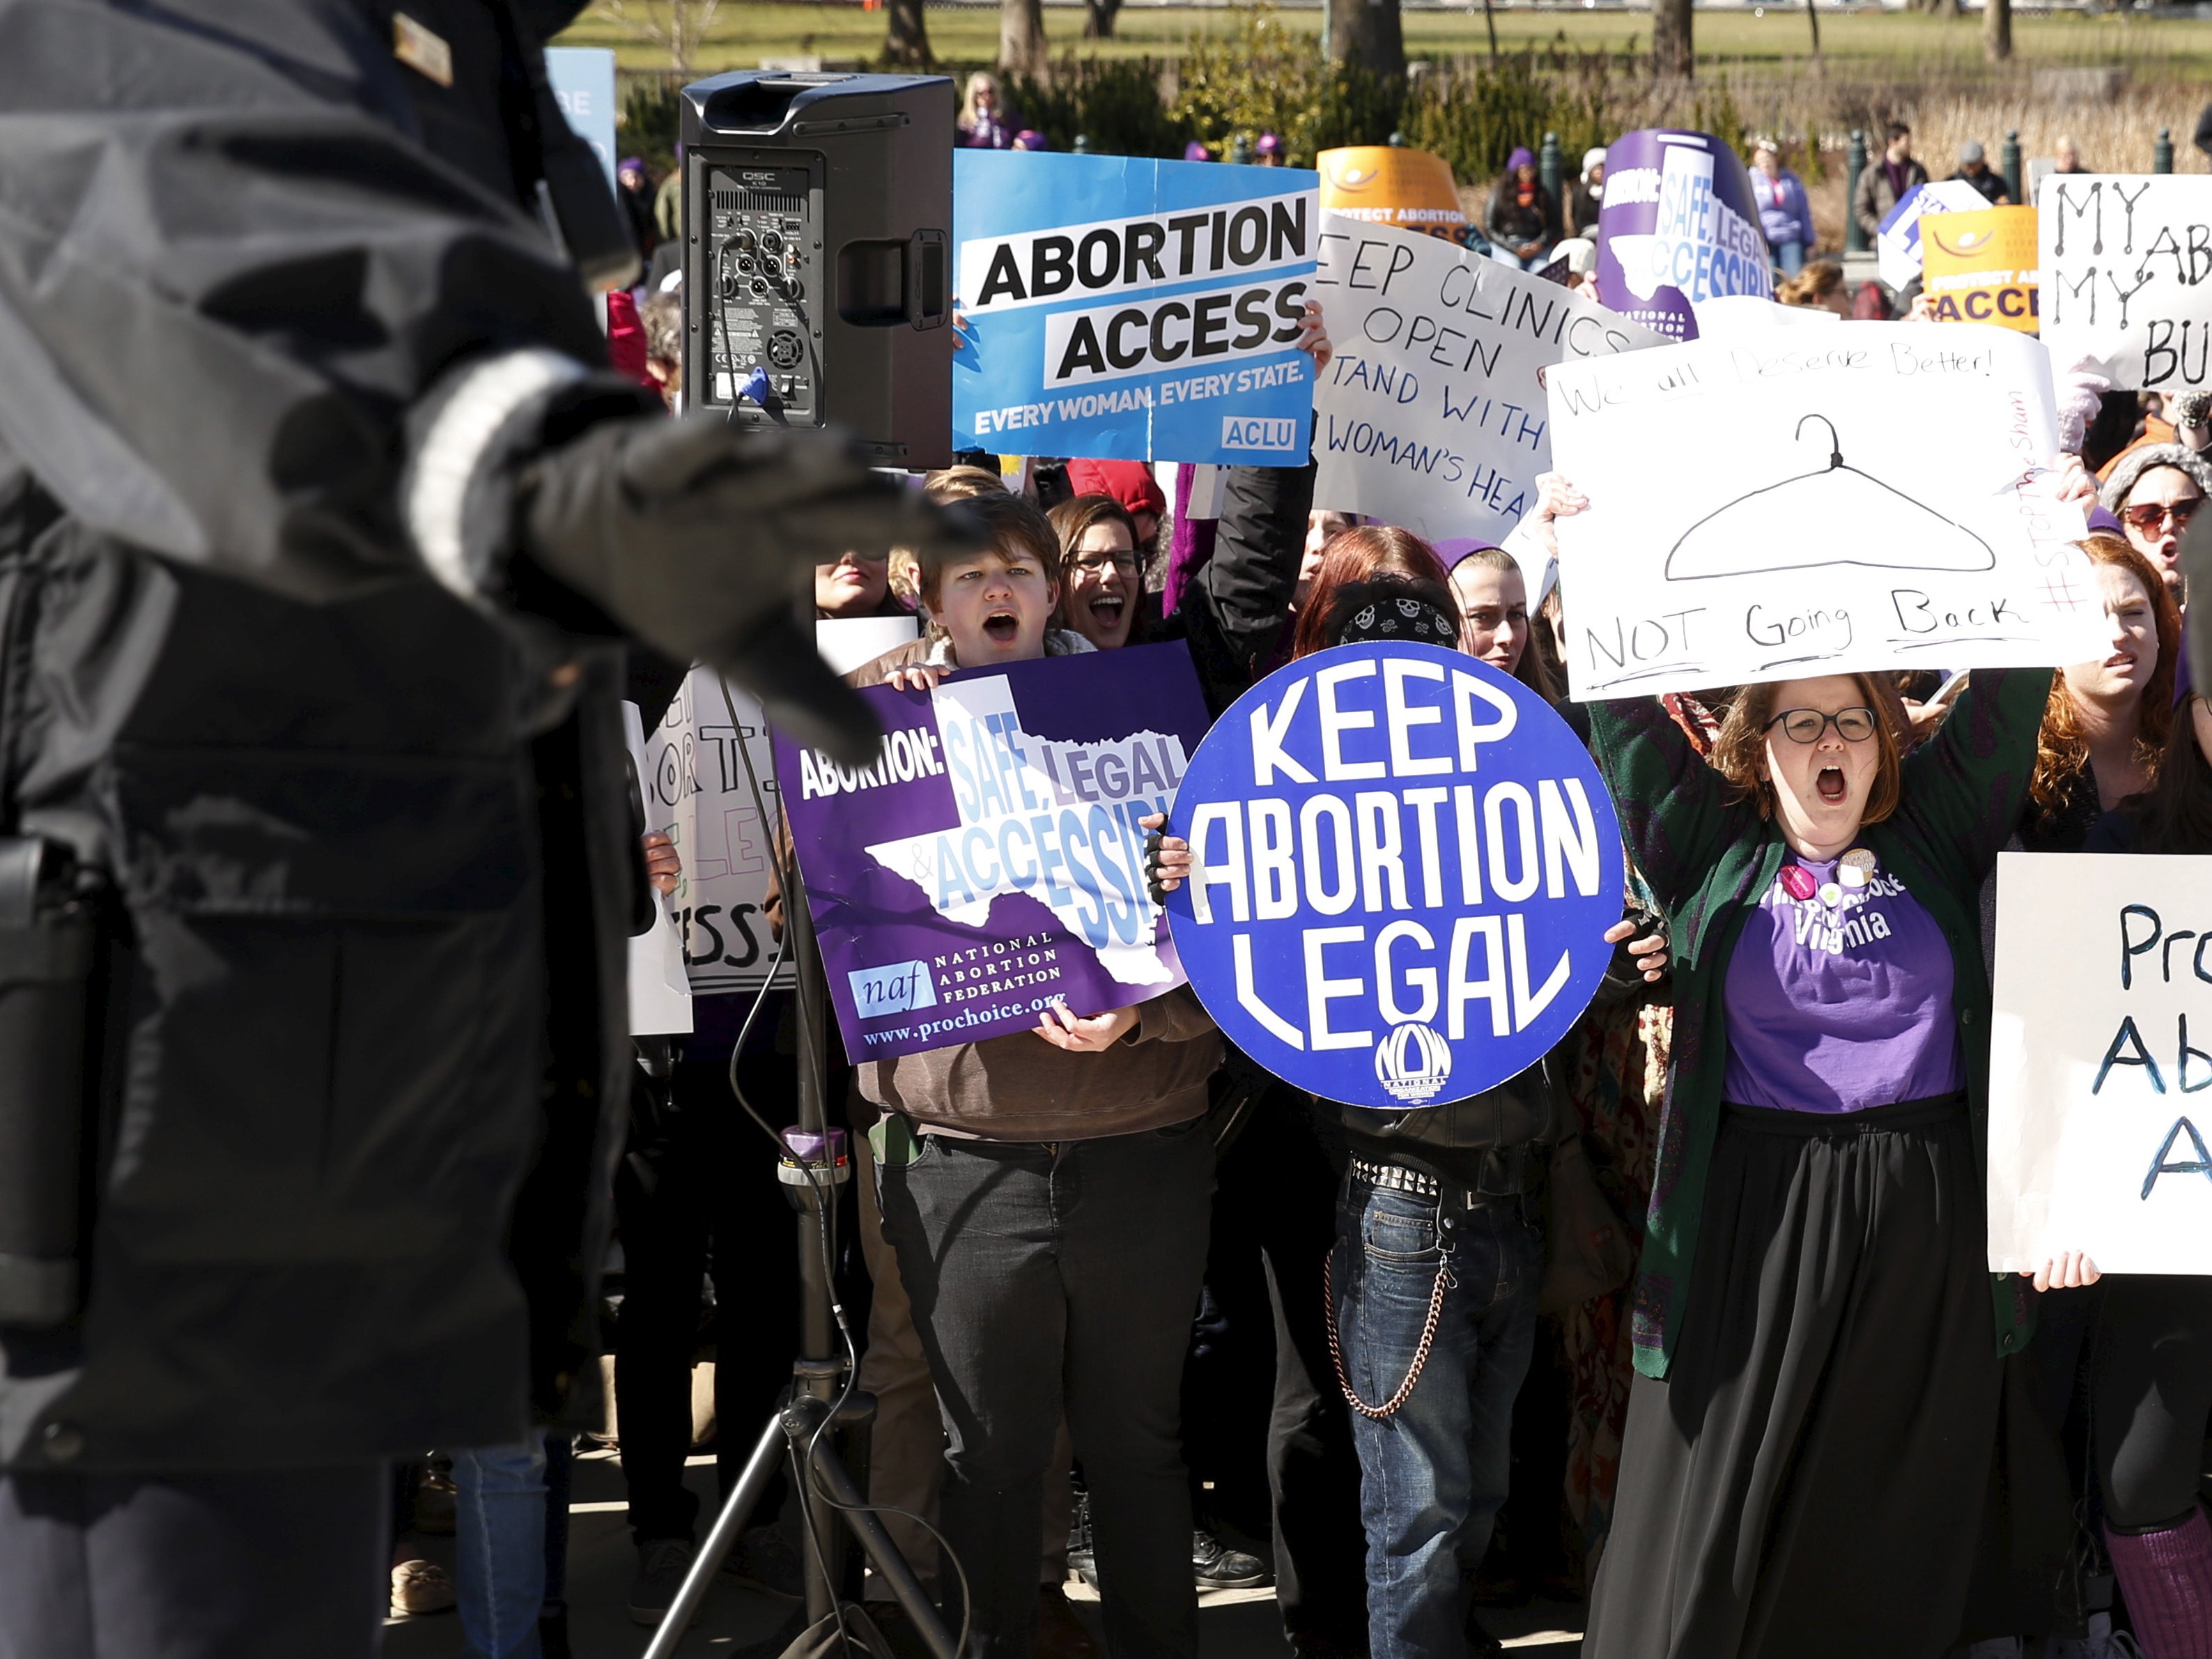 As many as 240,000 women have tried DIY abortions because of strict Texas laws